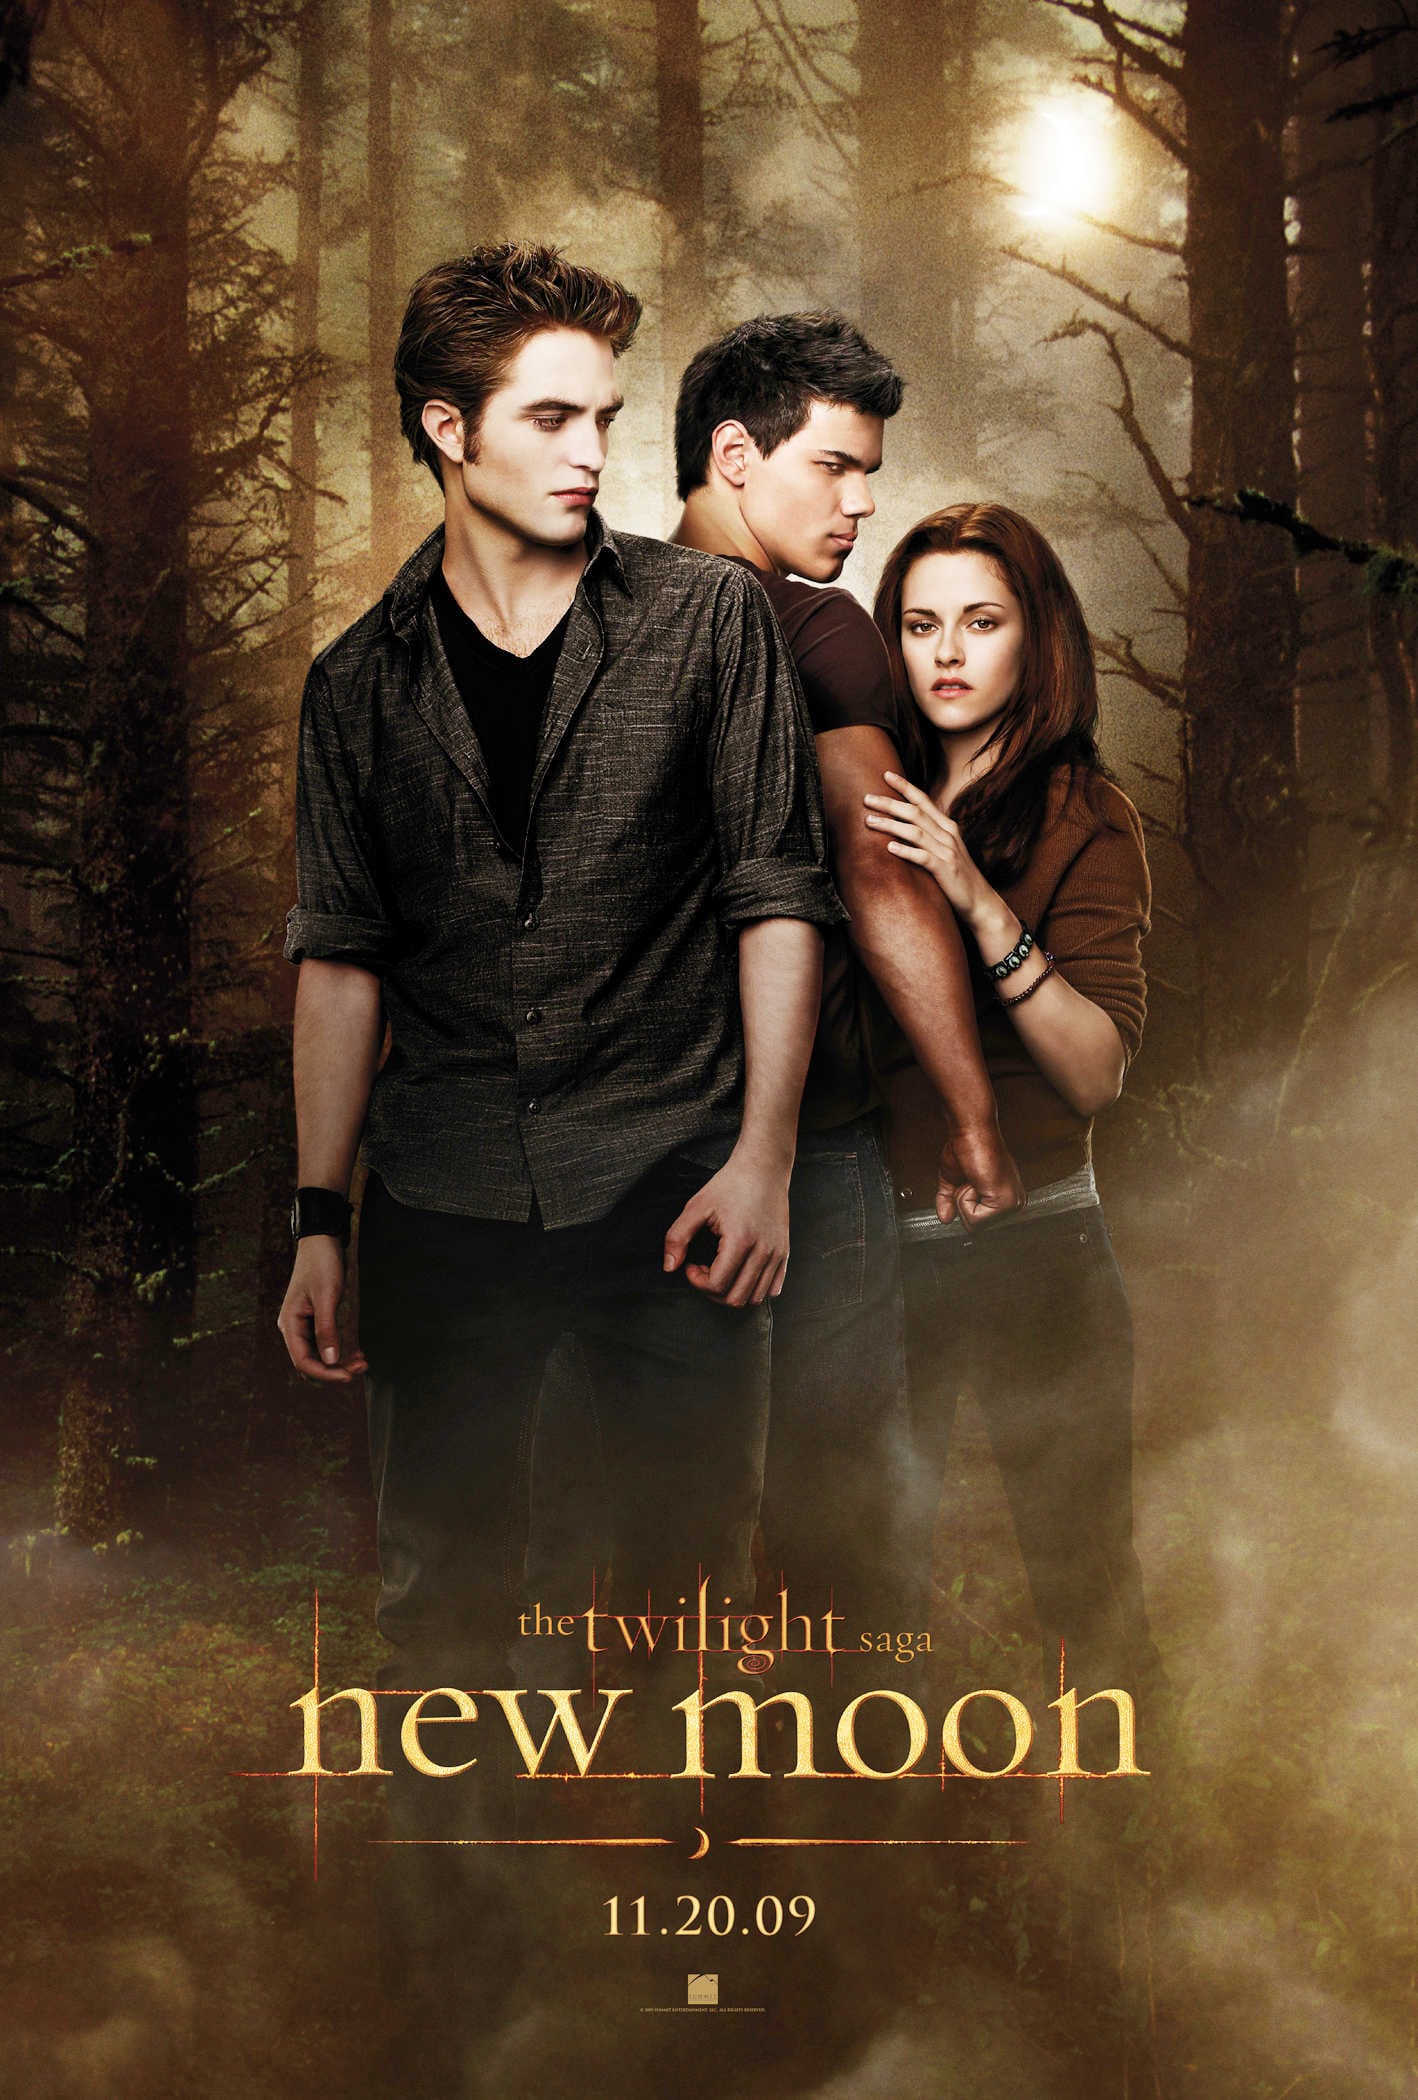 THE TWILIGHT SAGA NEW MOON Movieguide Movie Reviews for Families